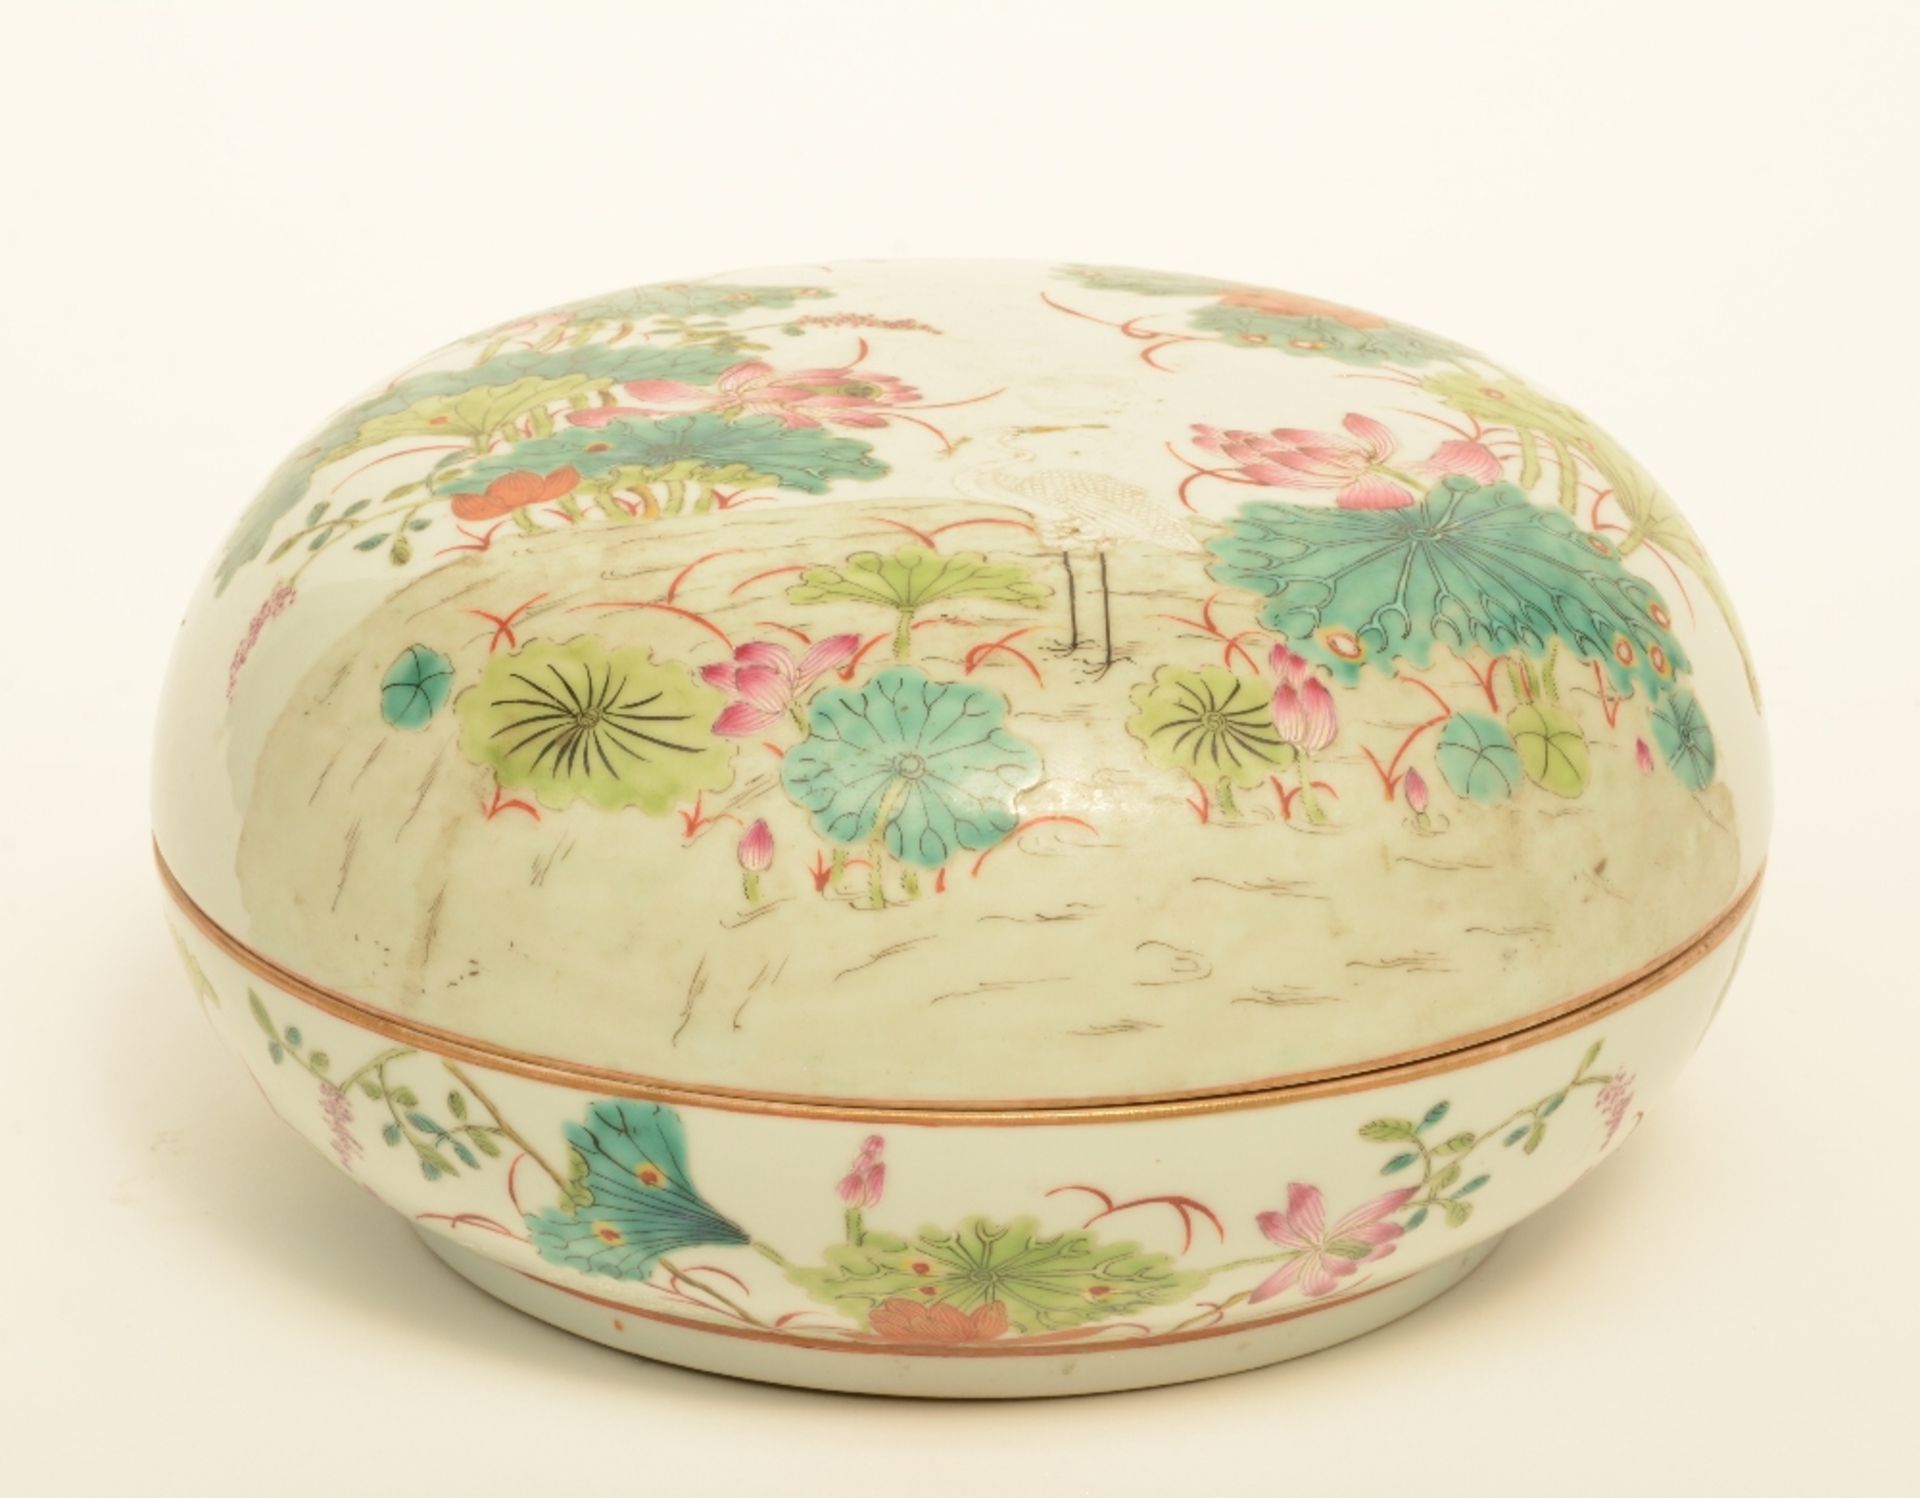 A Chinese famille rose bowl with cover, decorated with birds in a landscape, marked, H 13 - Diameter